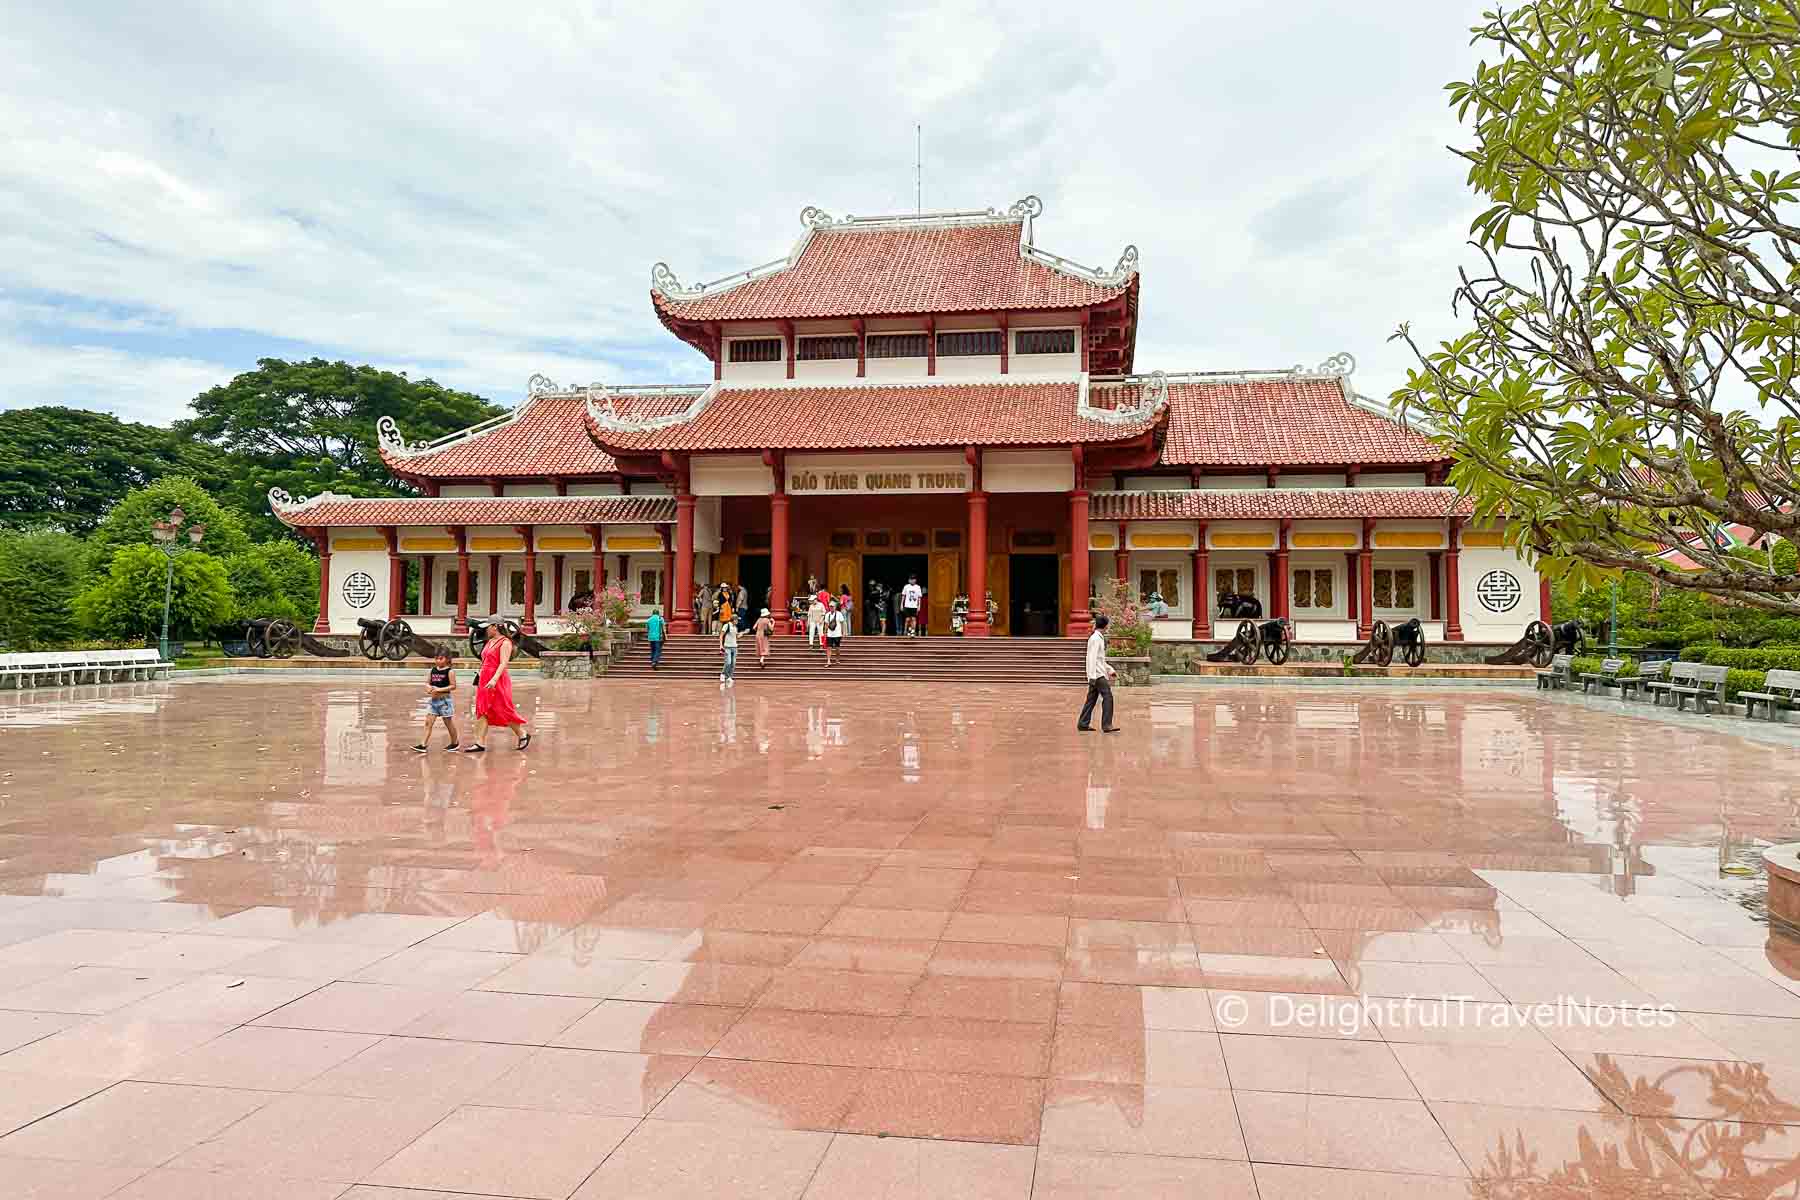 Quang Trung Musem, an attraction in Binh Dinh Province, Vietnam